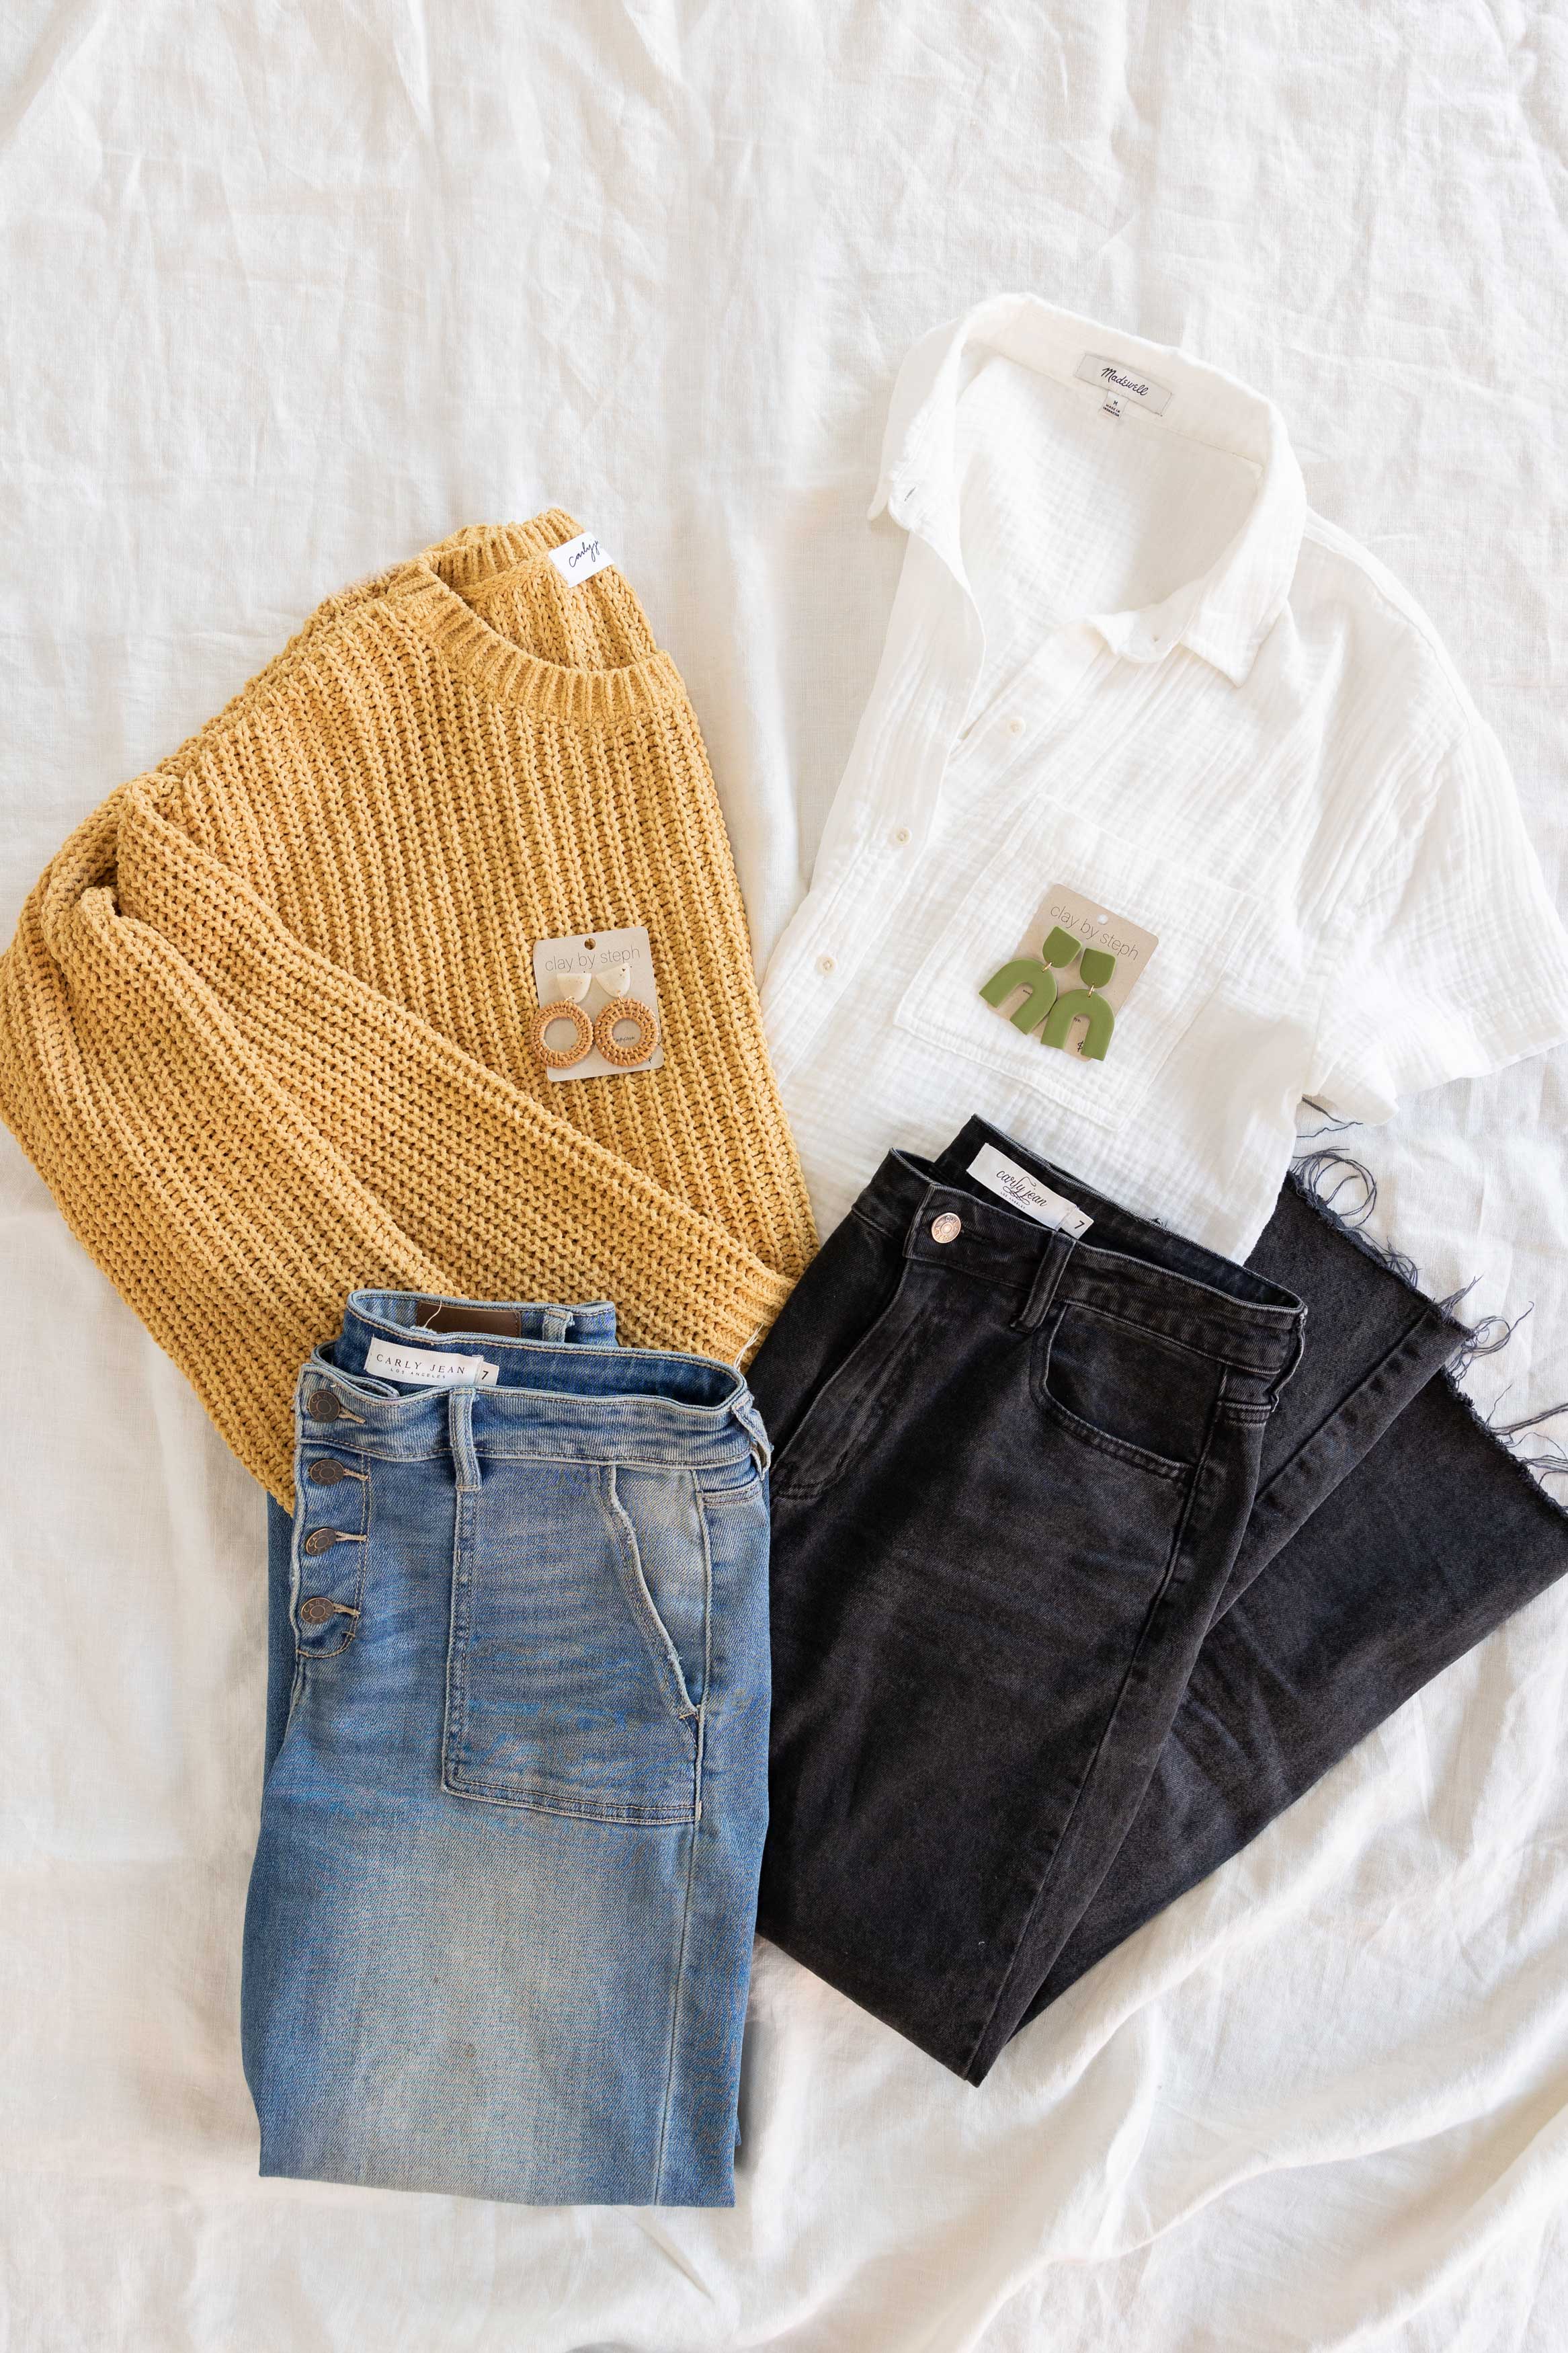 Two folded outfits lay on a bed. One is a folded marigold sweater, blue jeans, and Sea Salt Britta clay earrings. The second is a folded white linen shirt with black jeans and green clay earrings.